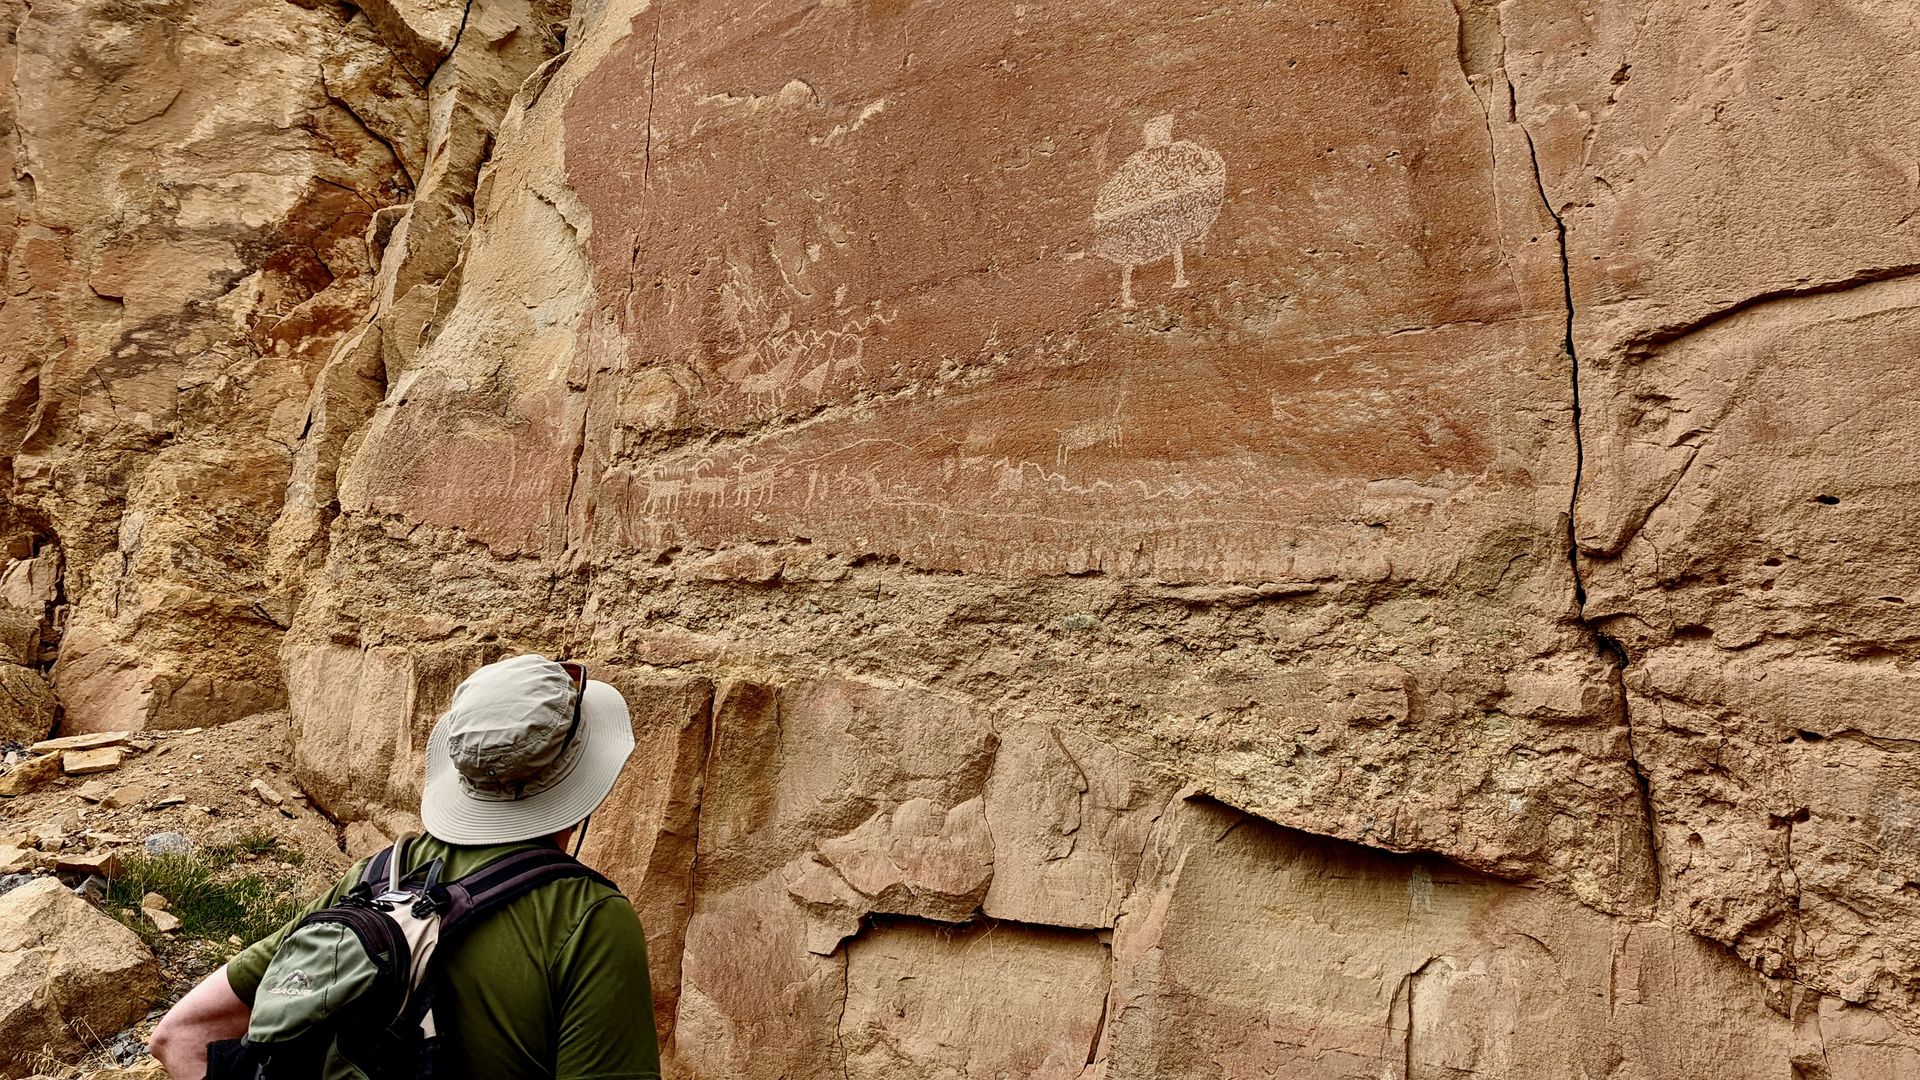 A man in a tan brimmed hat looks at rock art carved in orange stone.